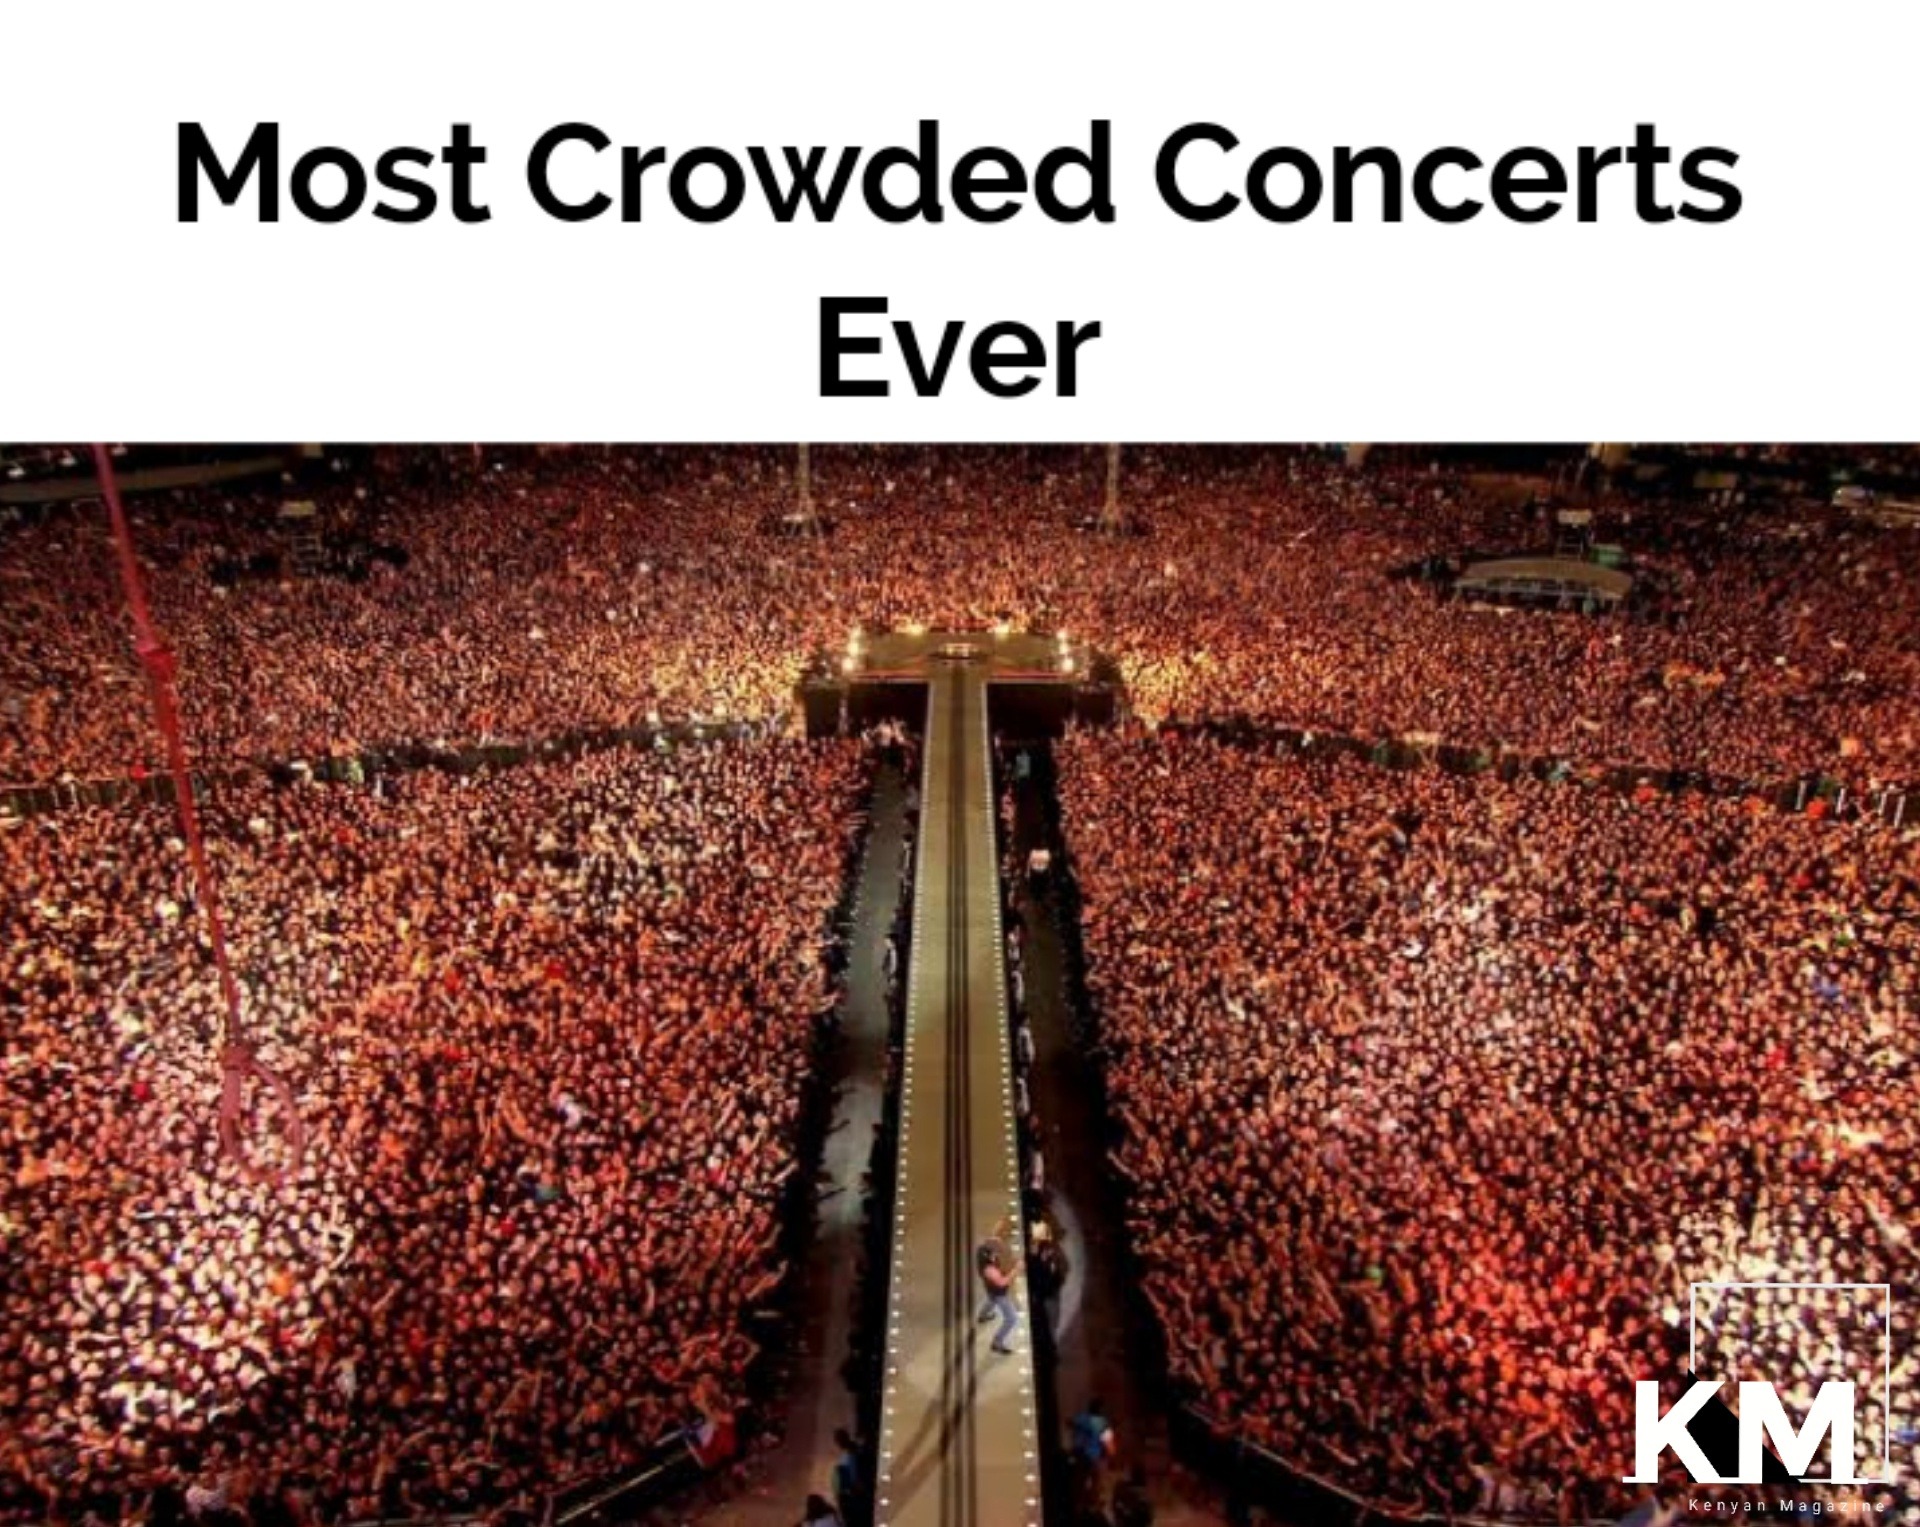 Most populated concert